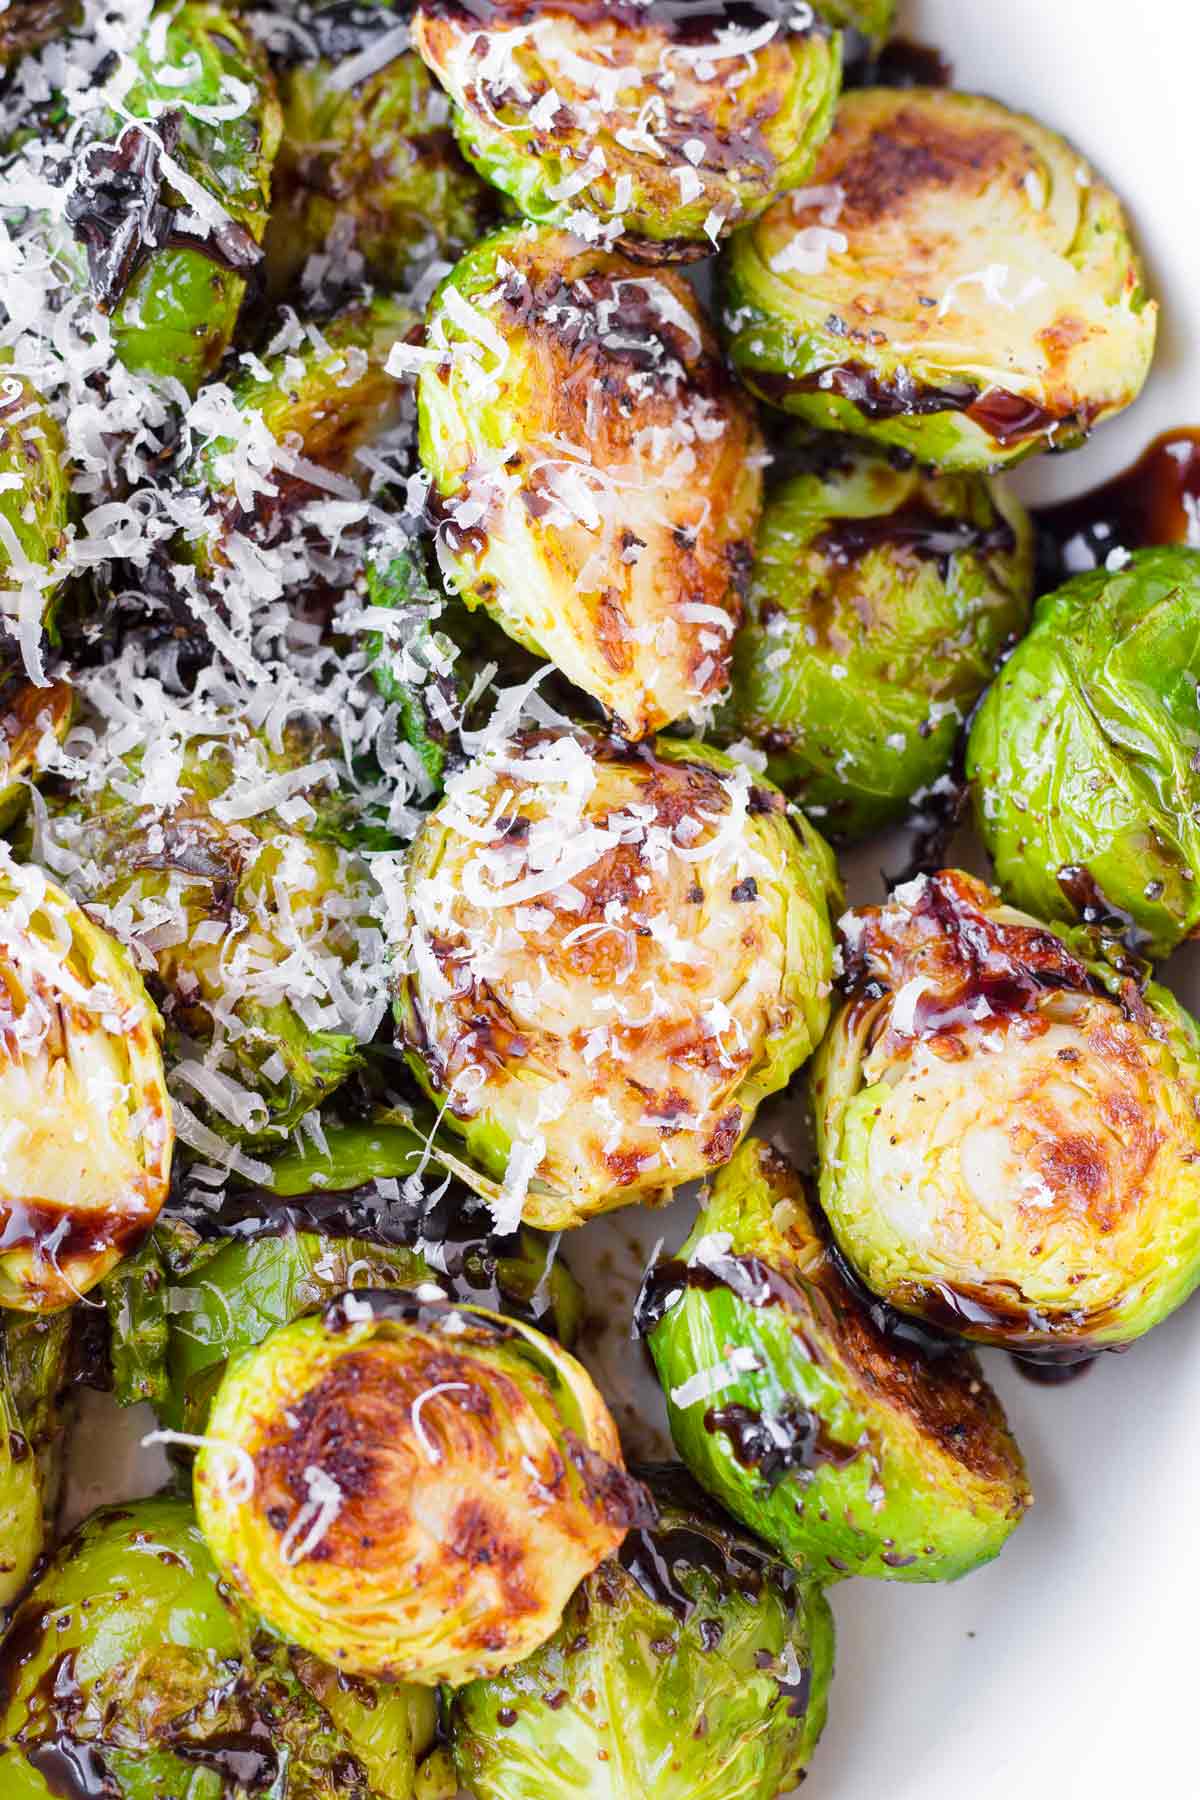 golden brown roasted brussels sprouts with balsamic drizzle